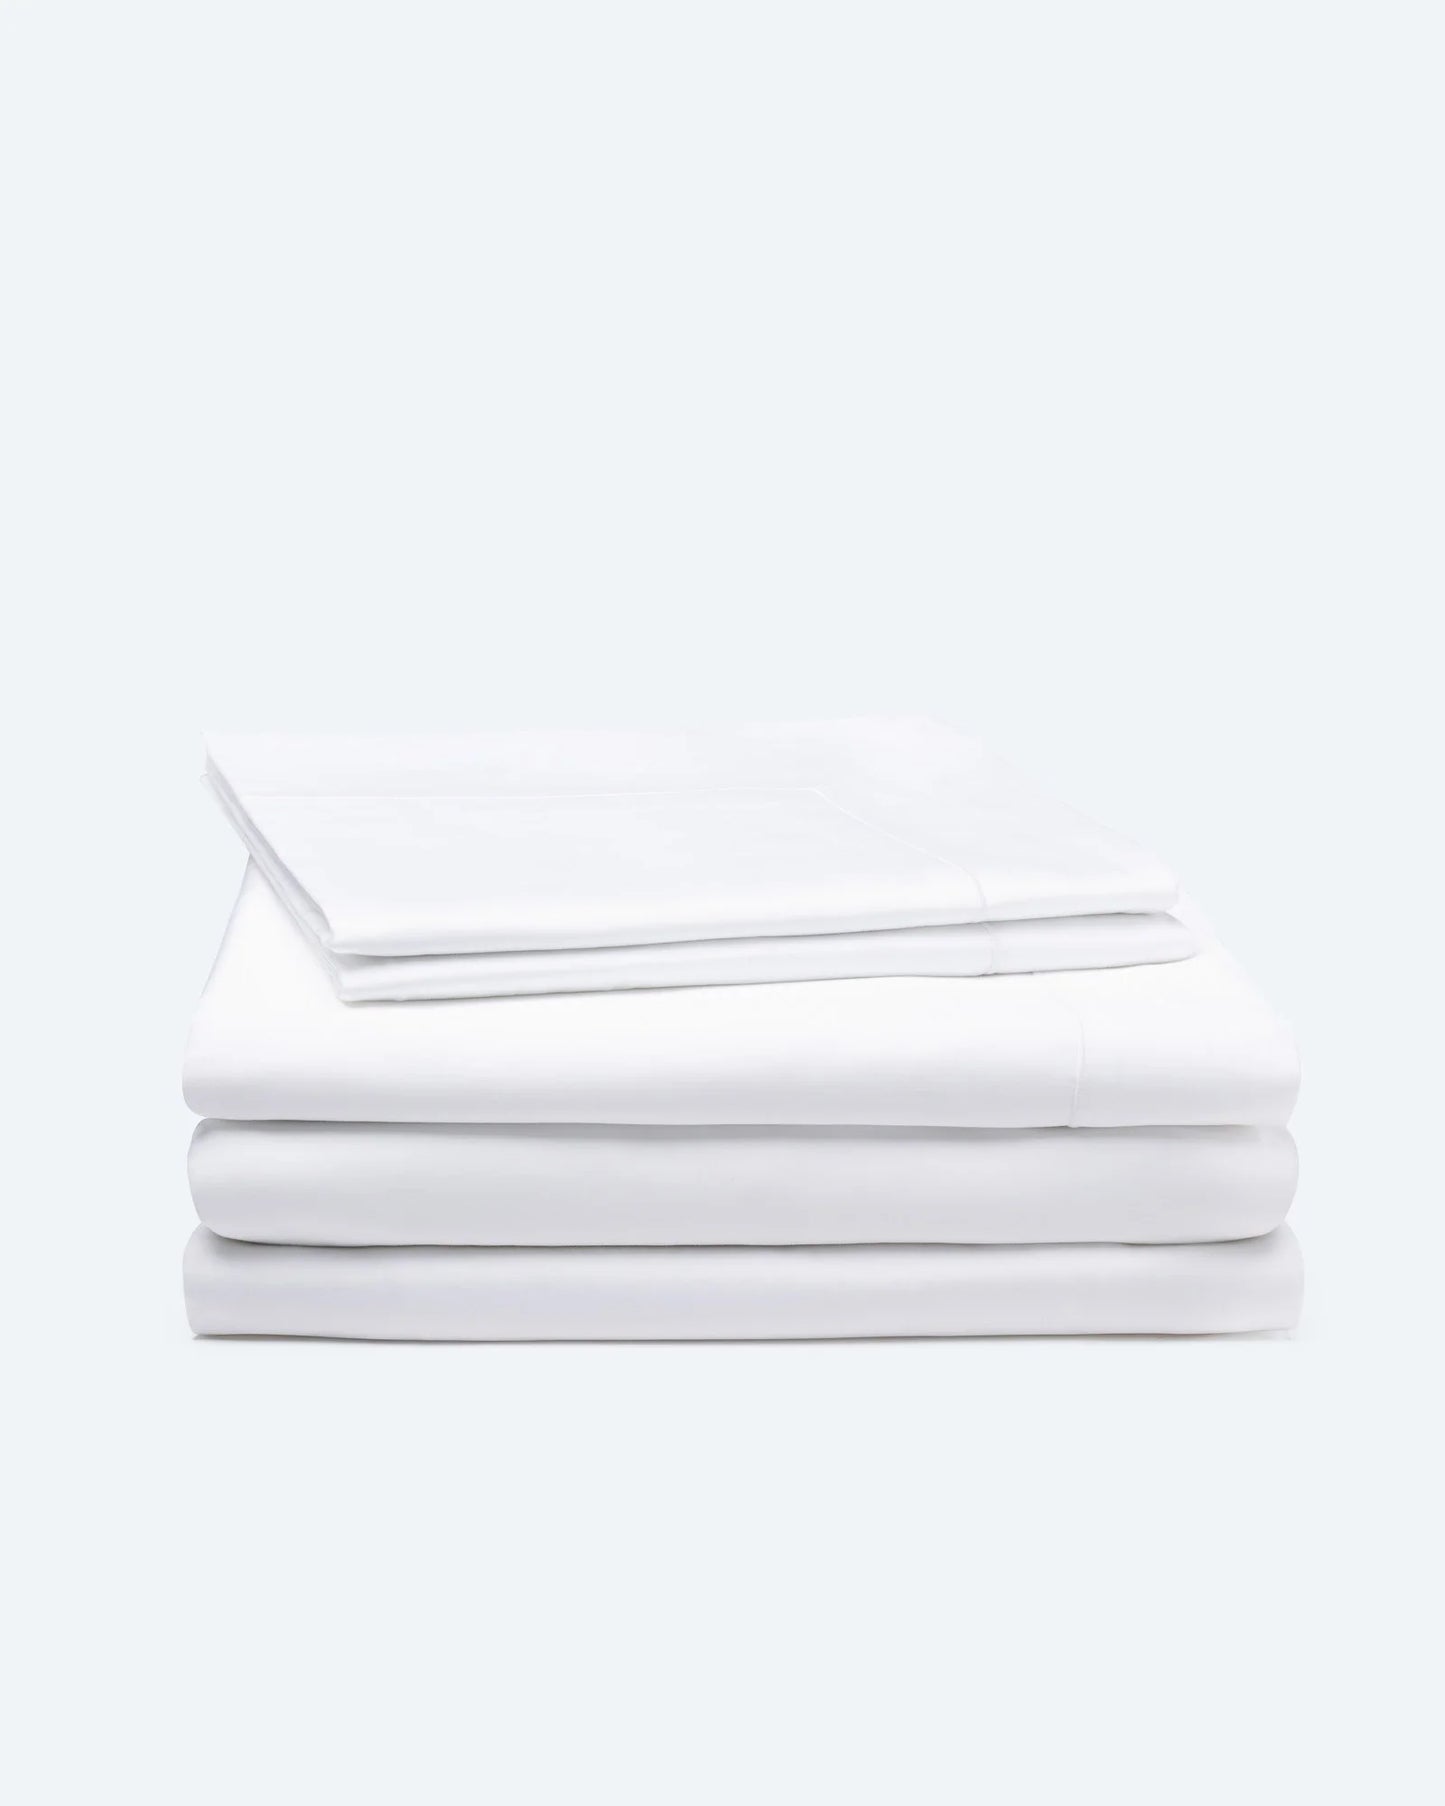 Bedding Set with Duvet Cover and Sheet Crisp White Cotton Sateen